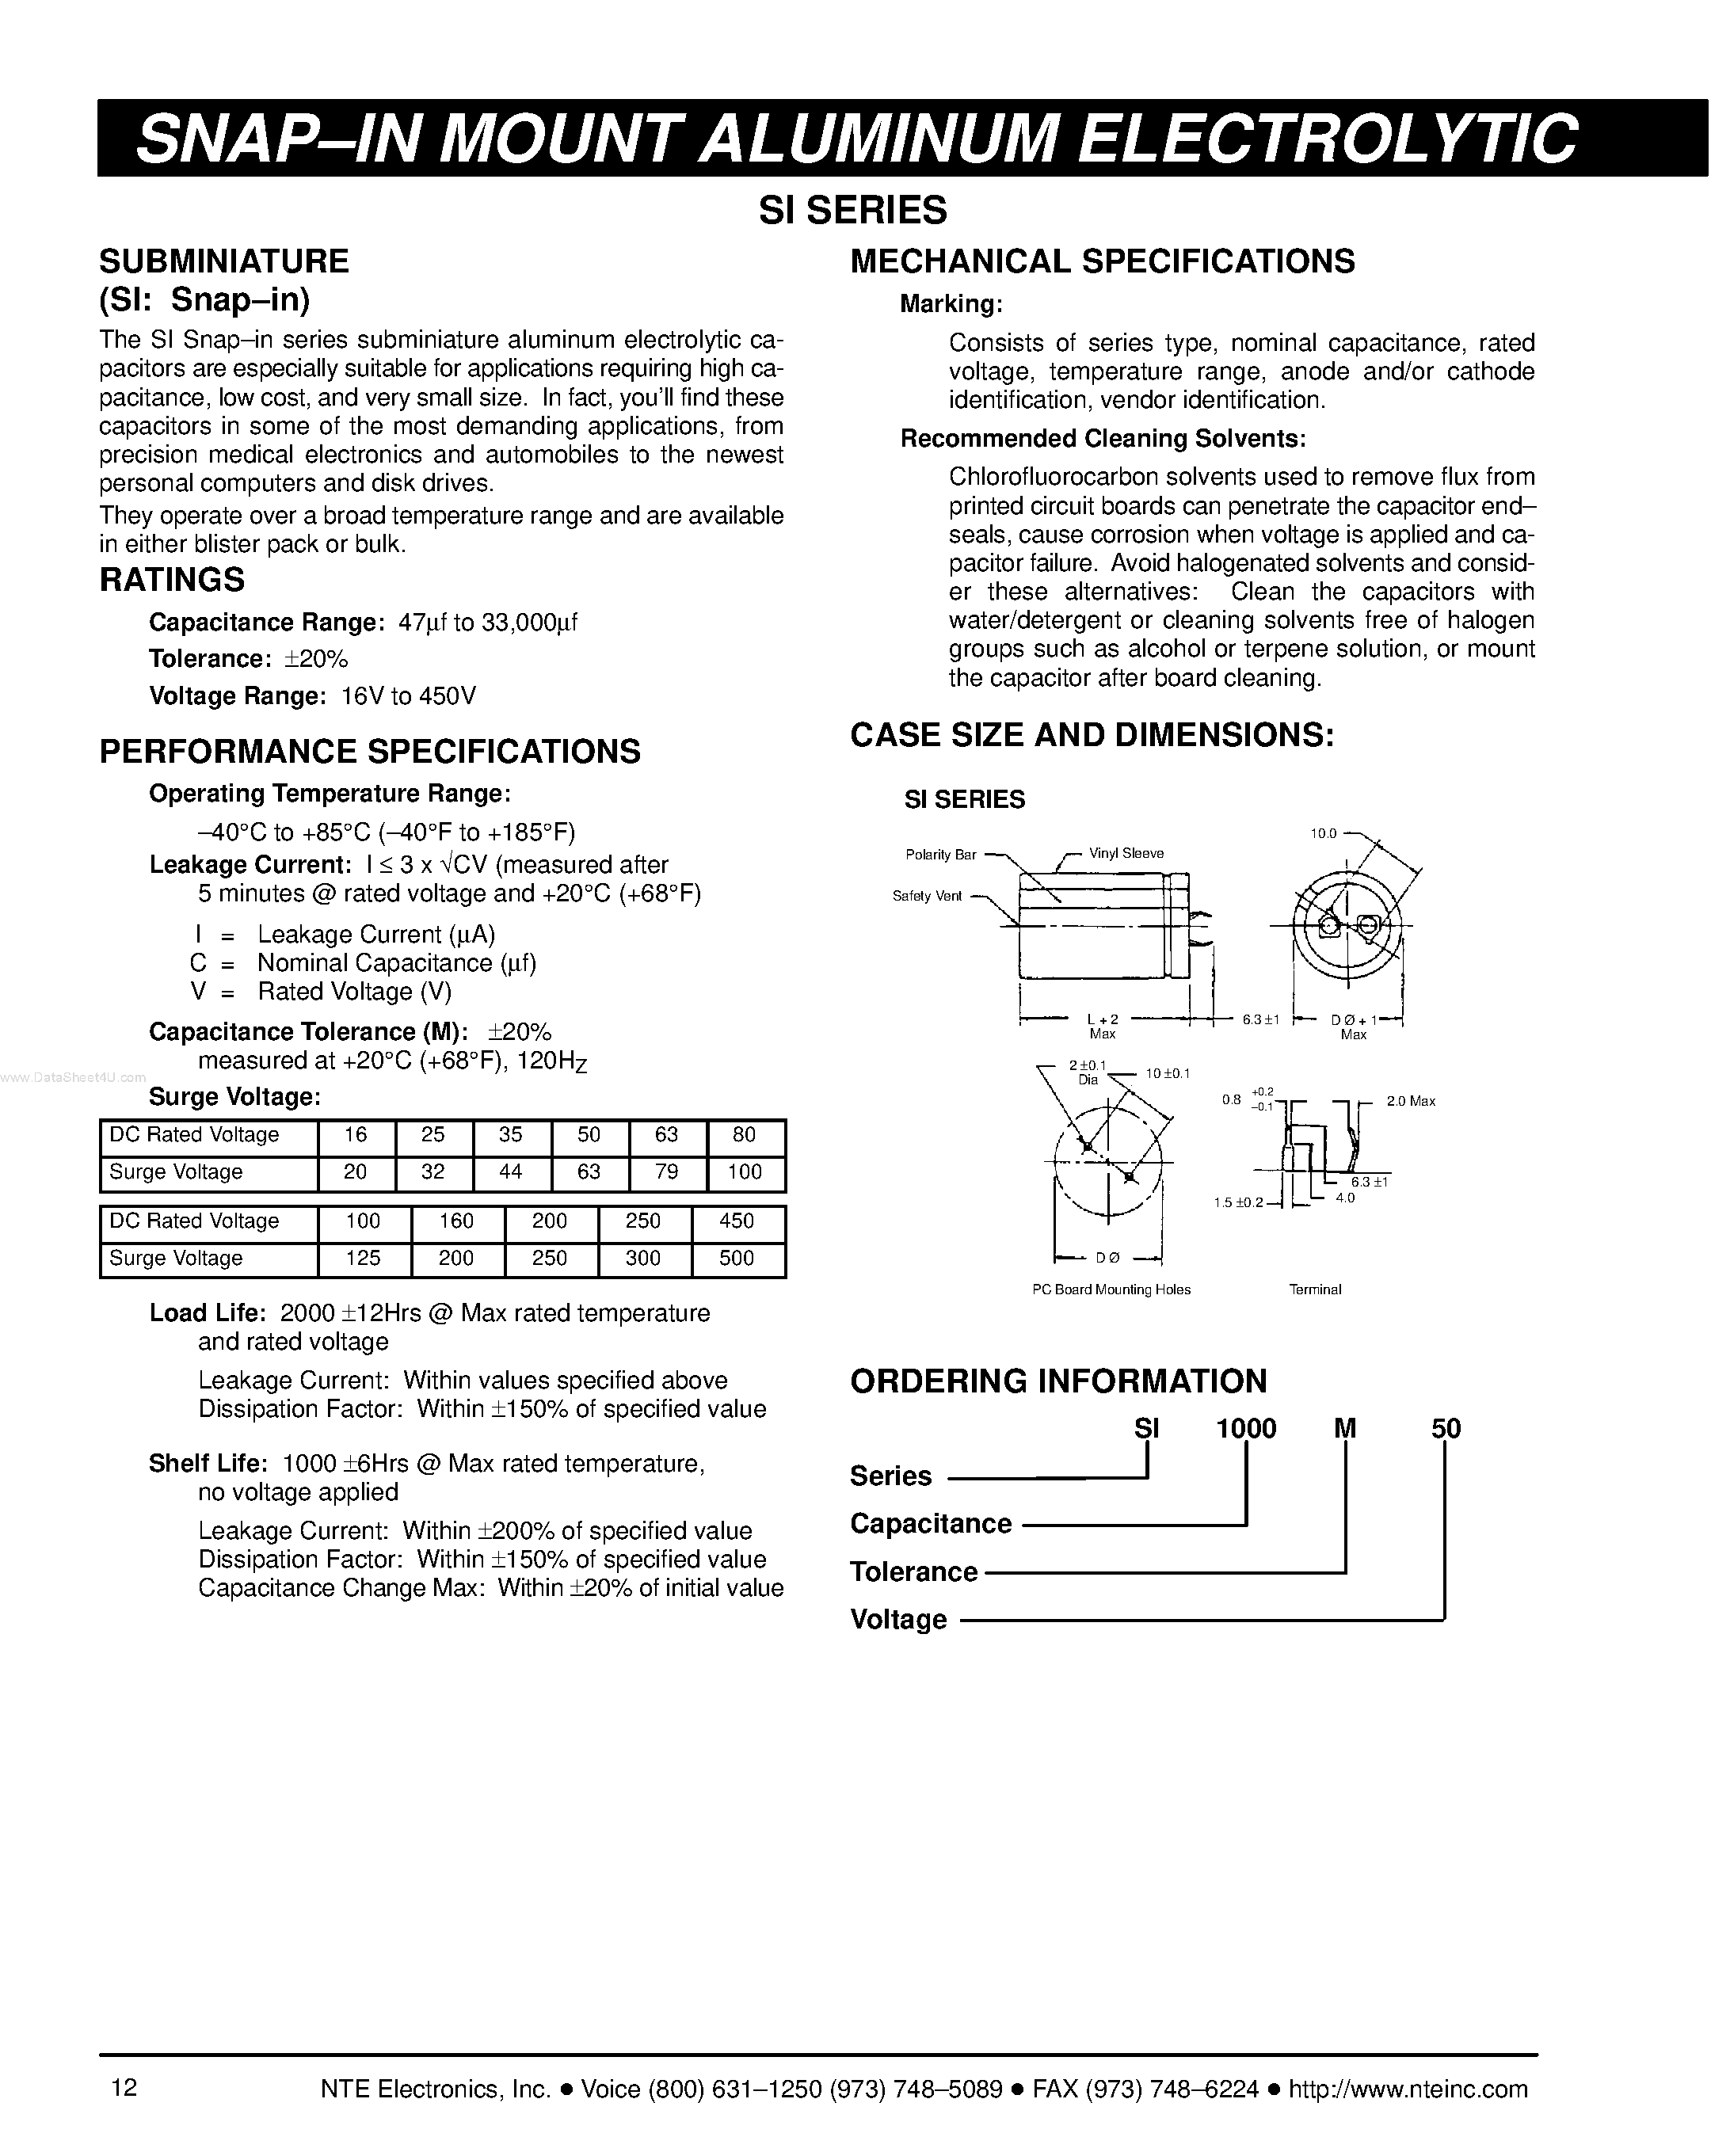 Datasheet SI1000 - (SI Series) SNAP-IN MOUNT ALUMINUM ELECTROLYTIC page 1